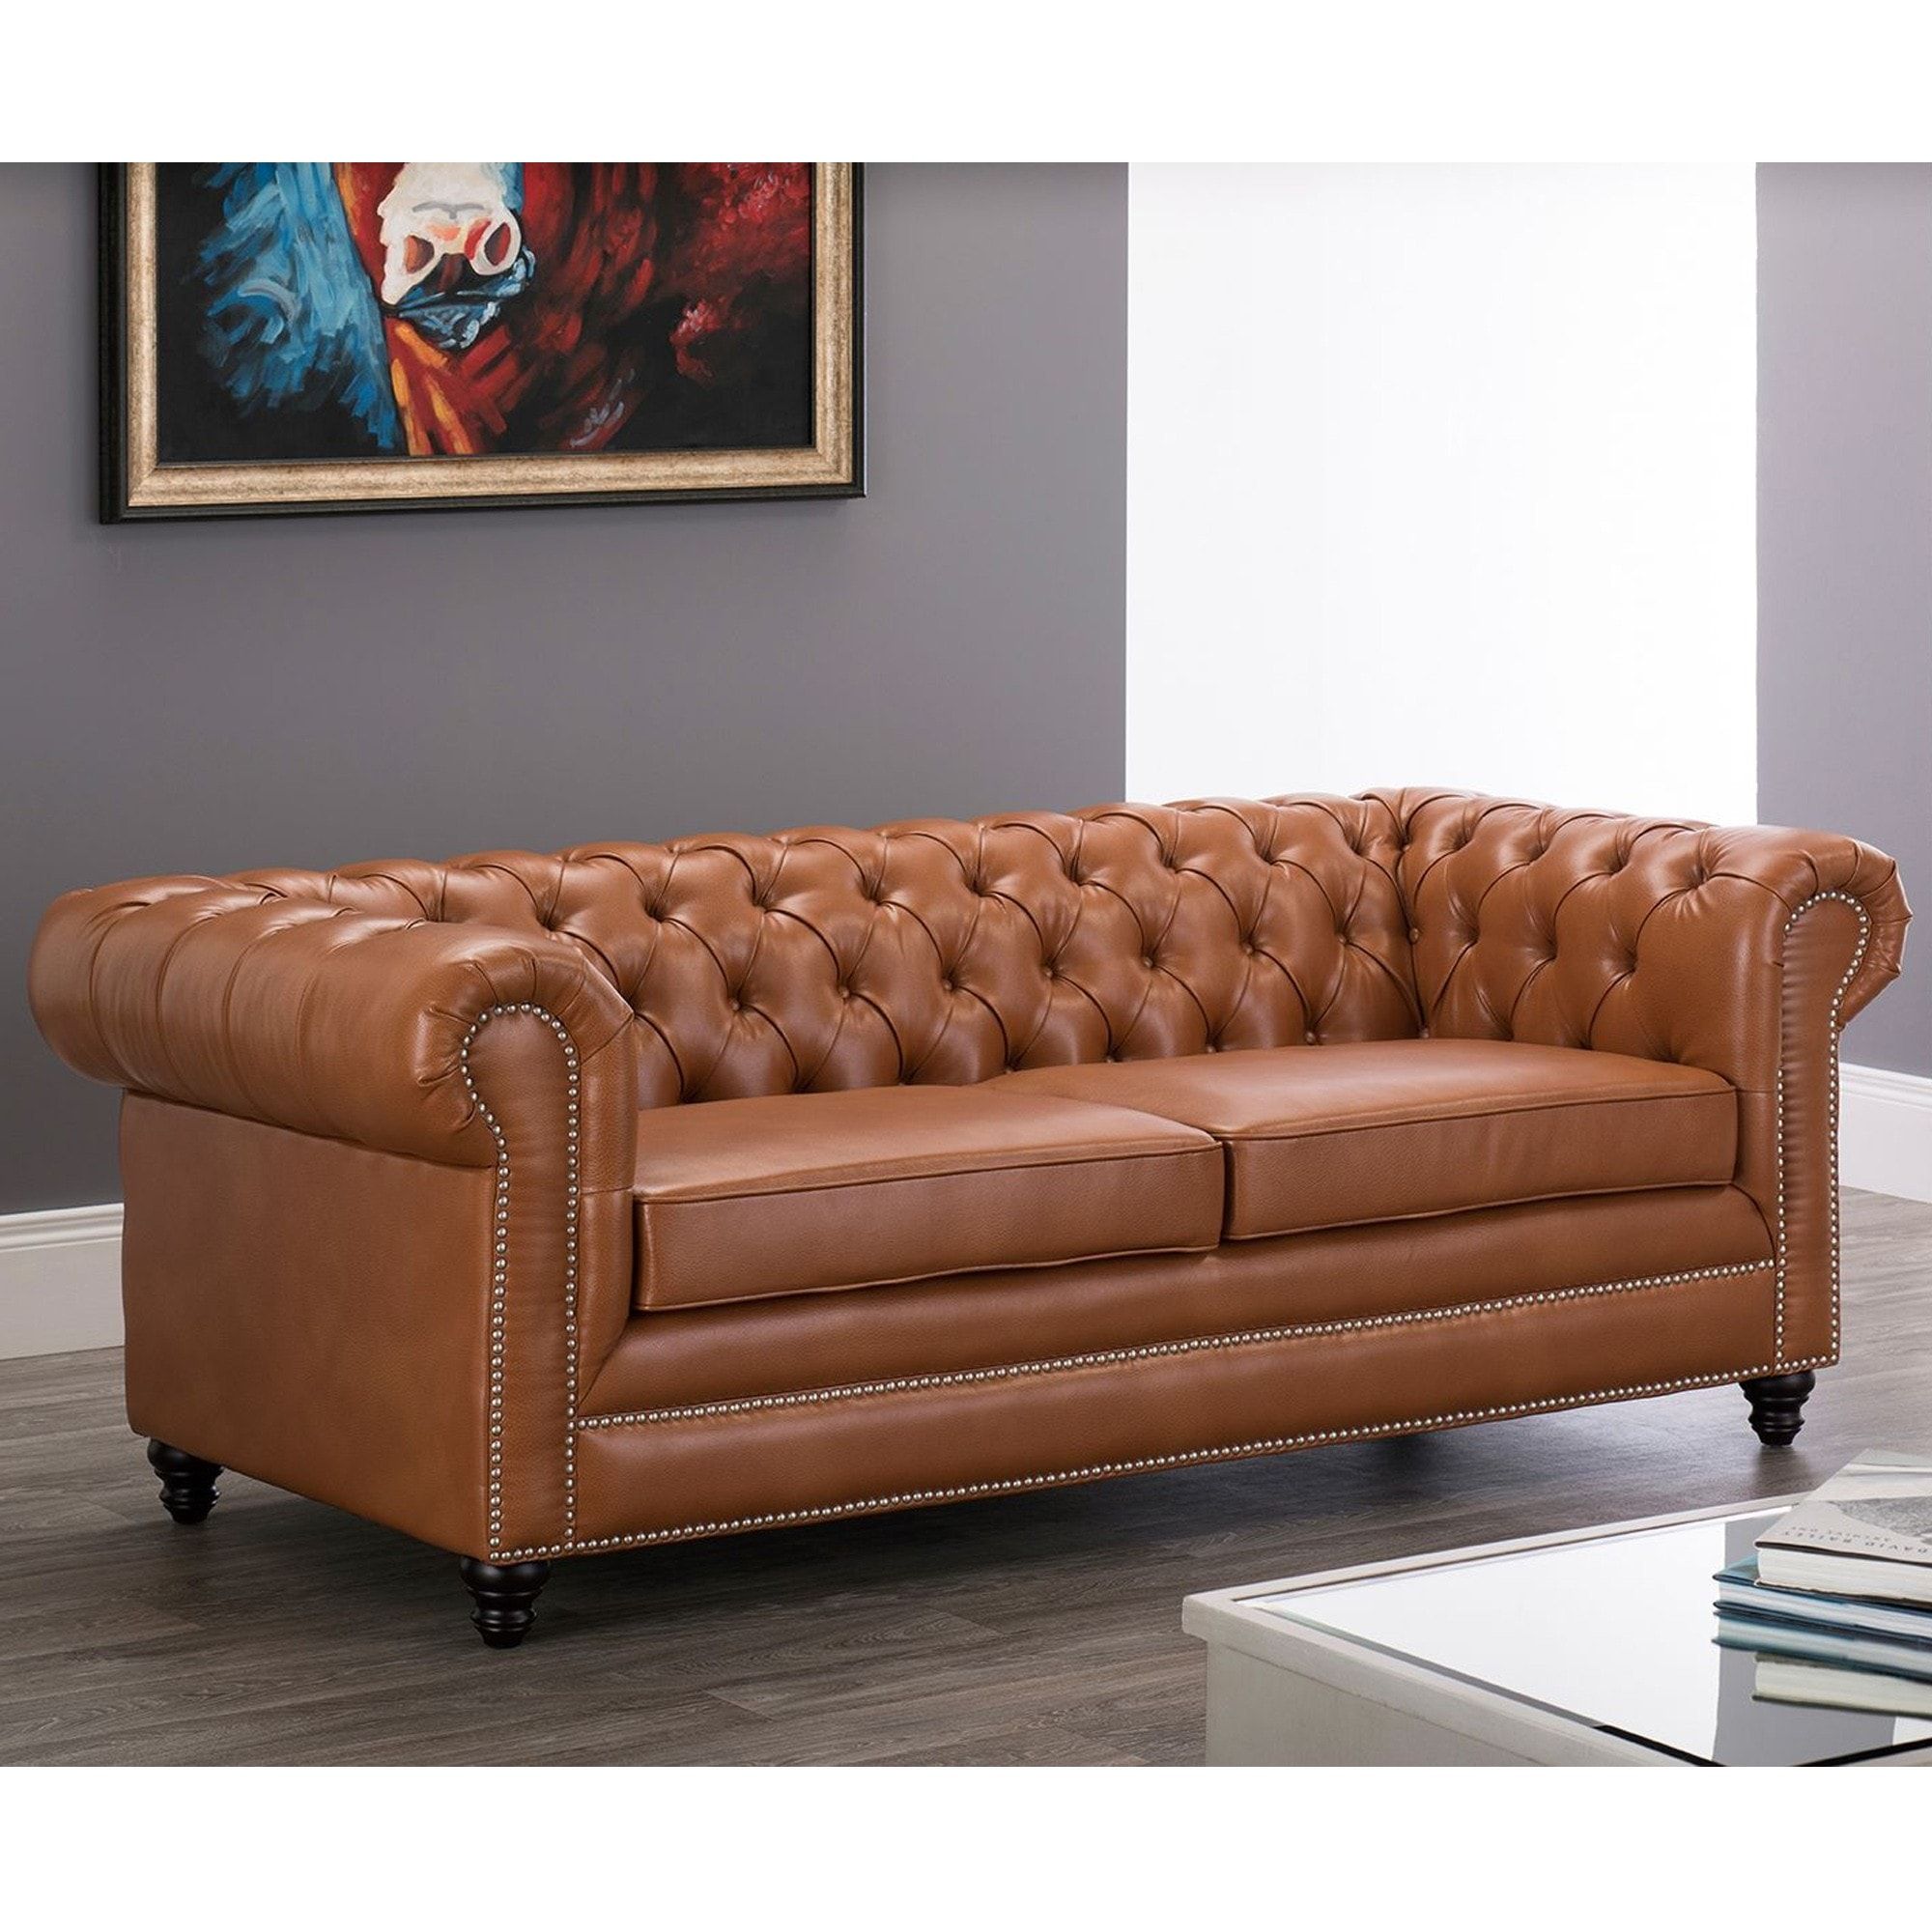 Faux Leather Chesterfield 3 Seater Sofa Tan | Tan Chesterfield Sofa Regarding Faux Leather Sofas (Gallery 3 of 21)